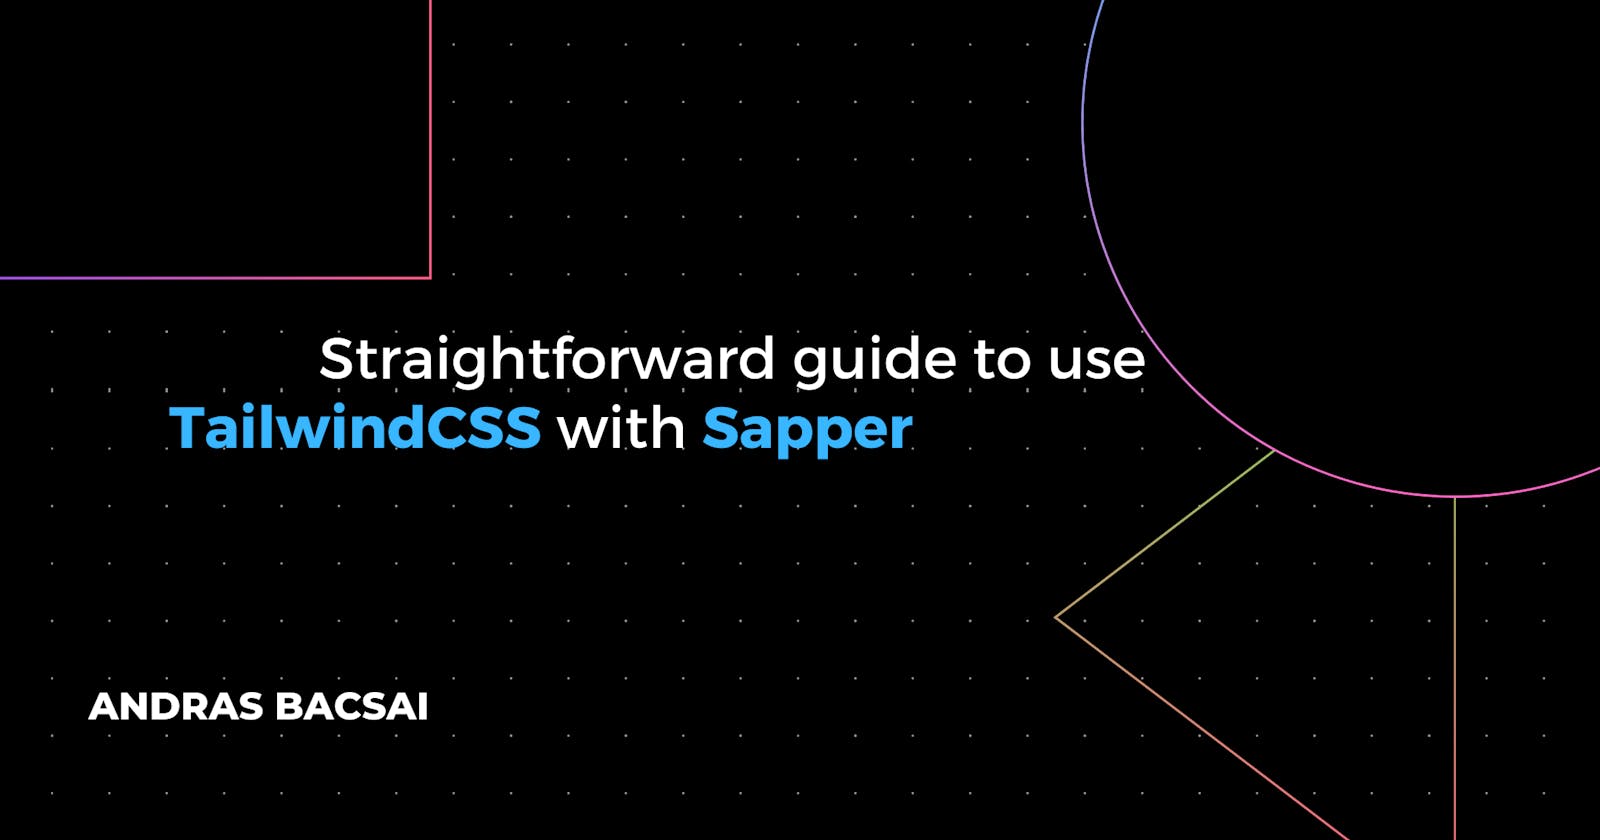 Straightforward guide to use TailwindCSS with Sapper